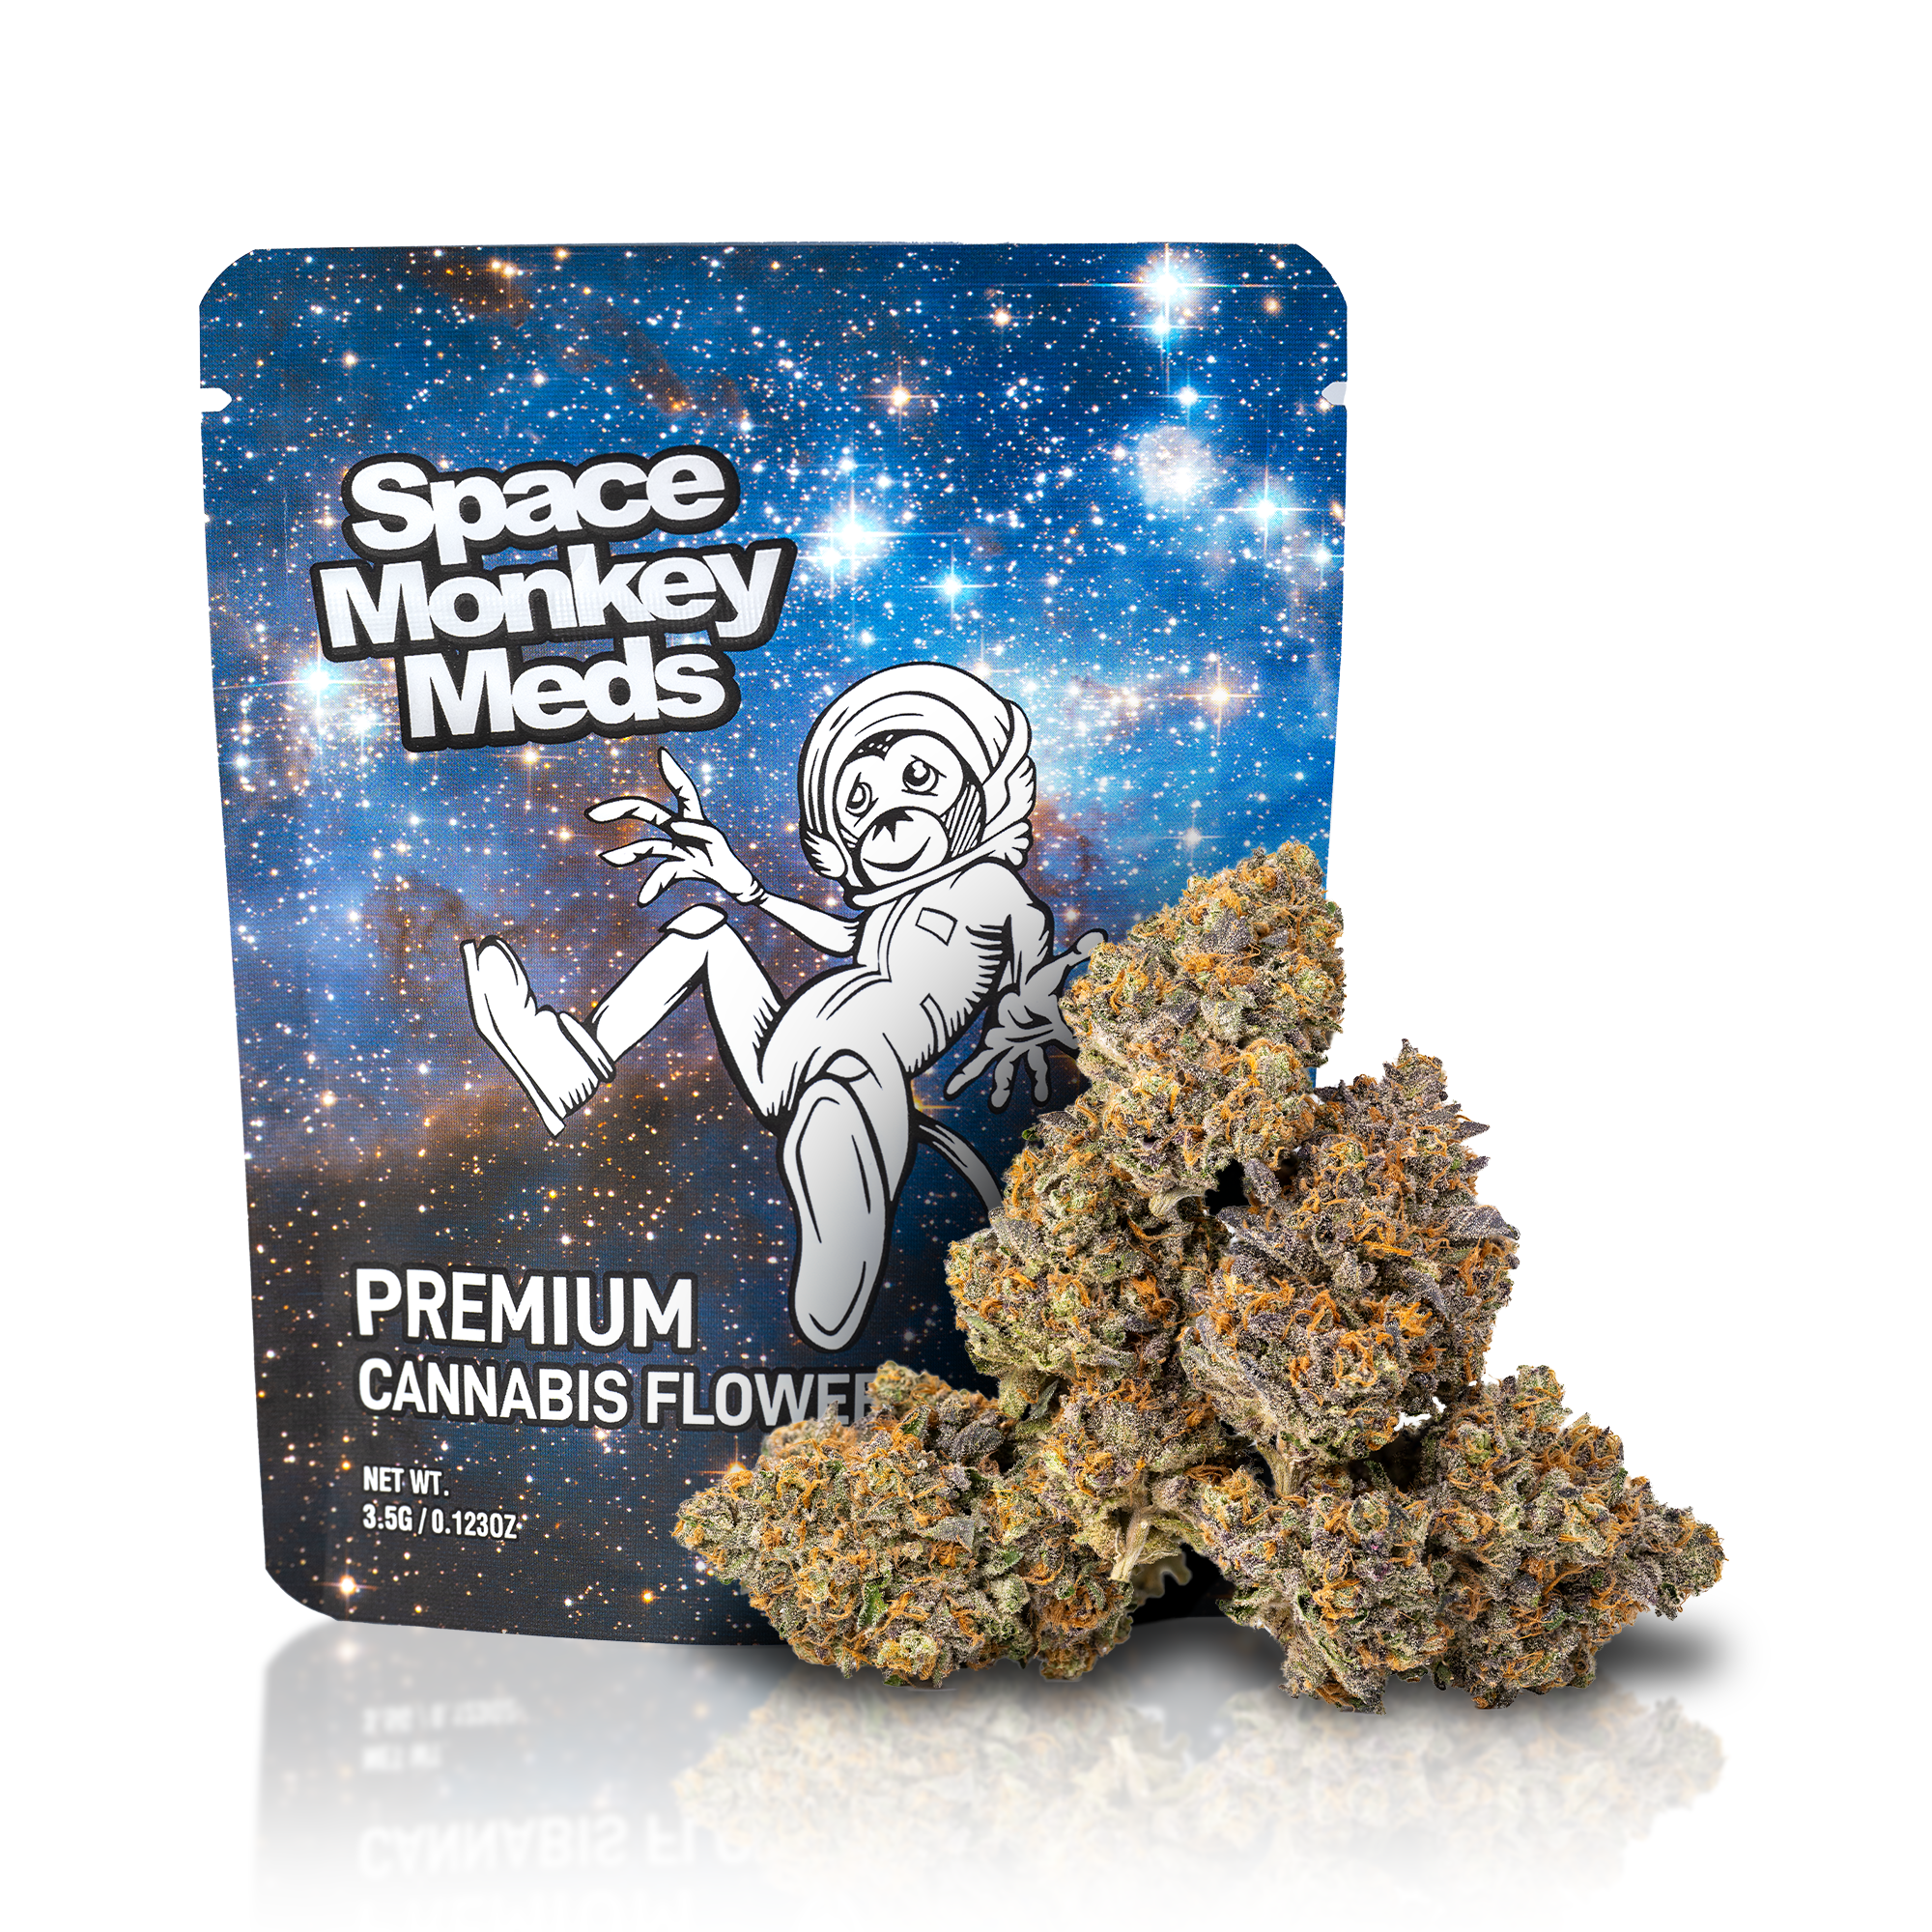 Space Monkey Cannabis Strain For Sale Online In Waterford Ireland